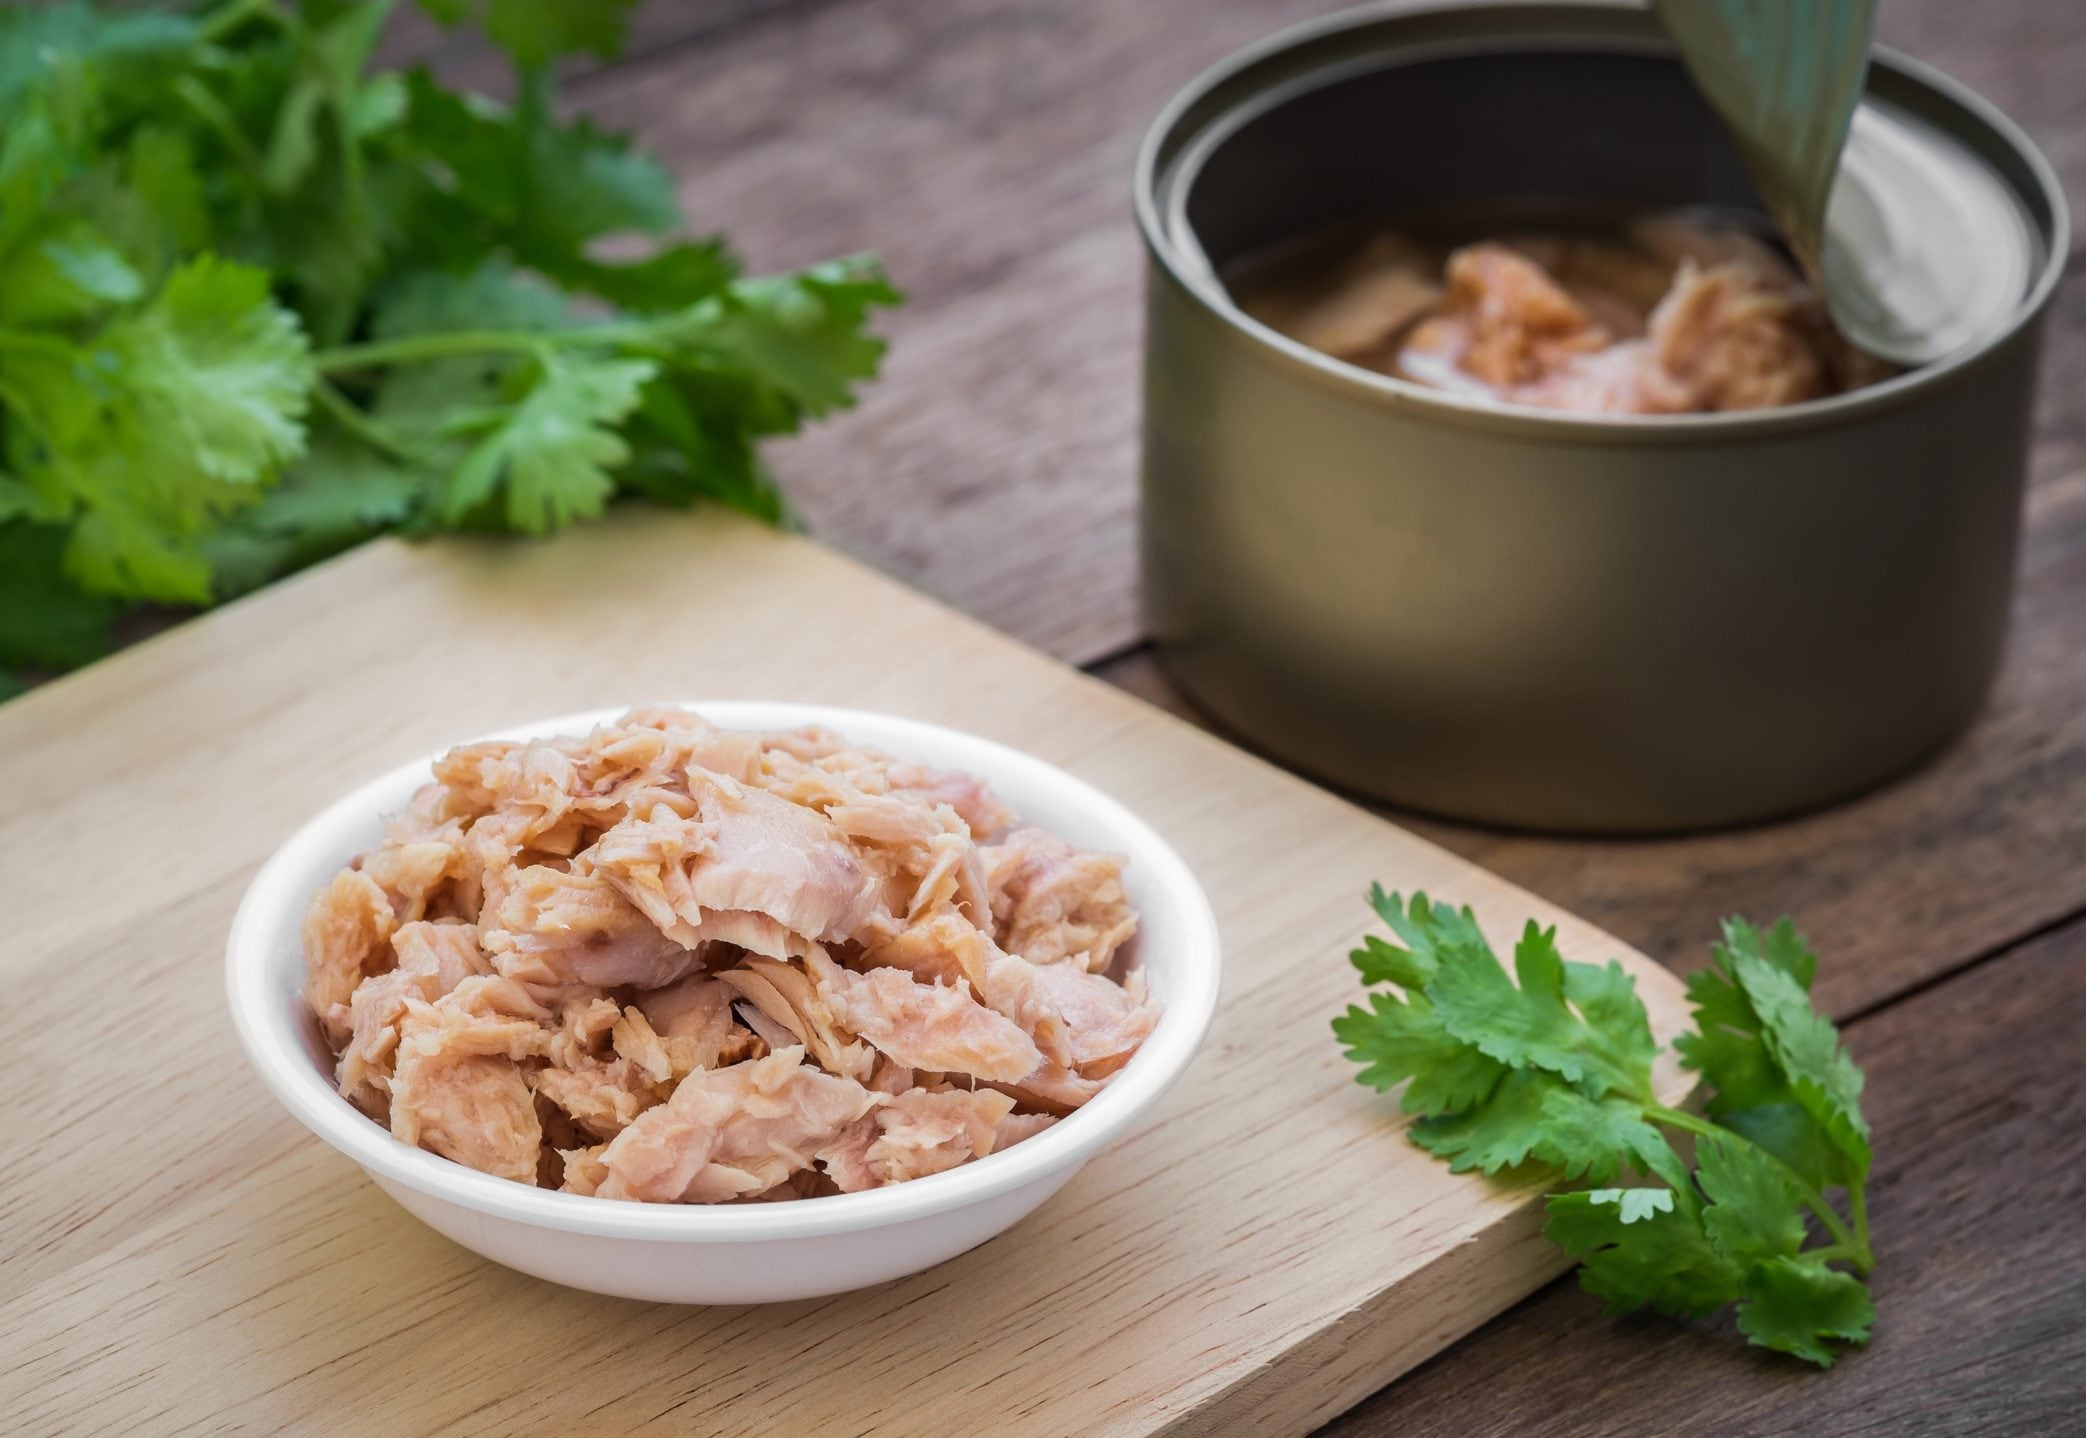 how-to-eat-canned-tuna-healthily